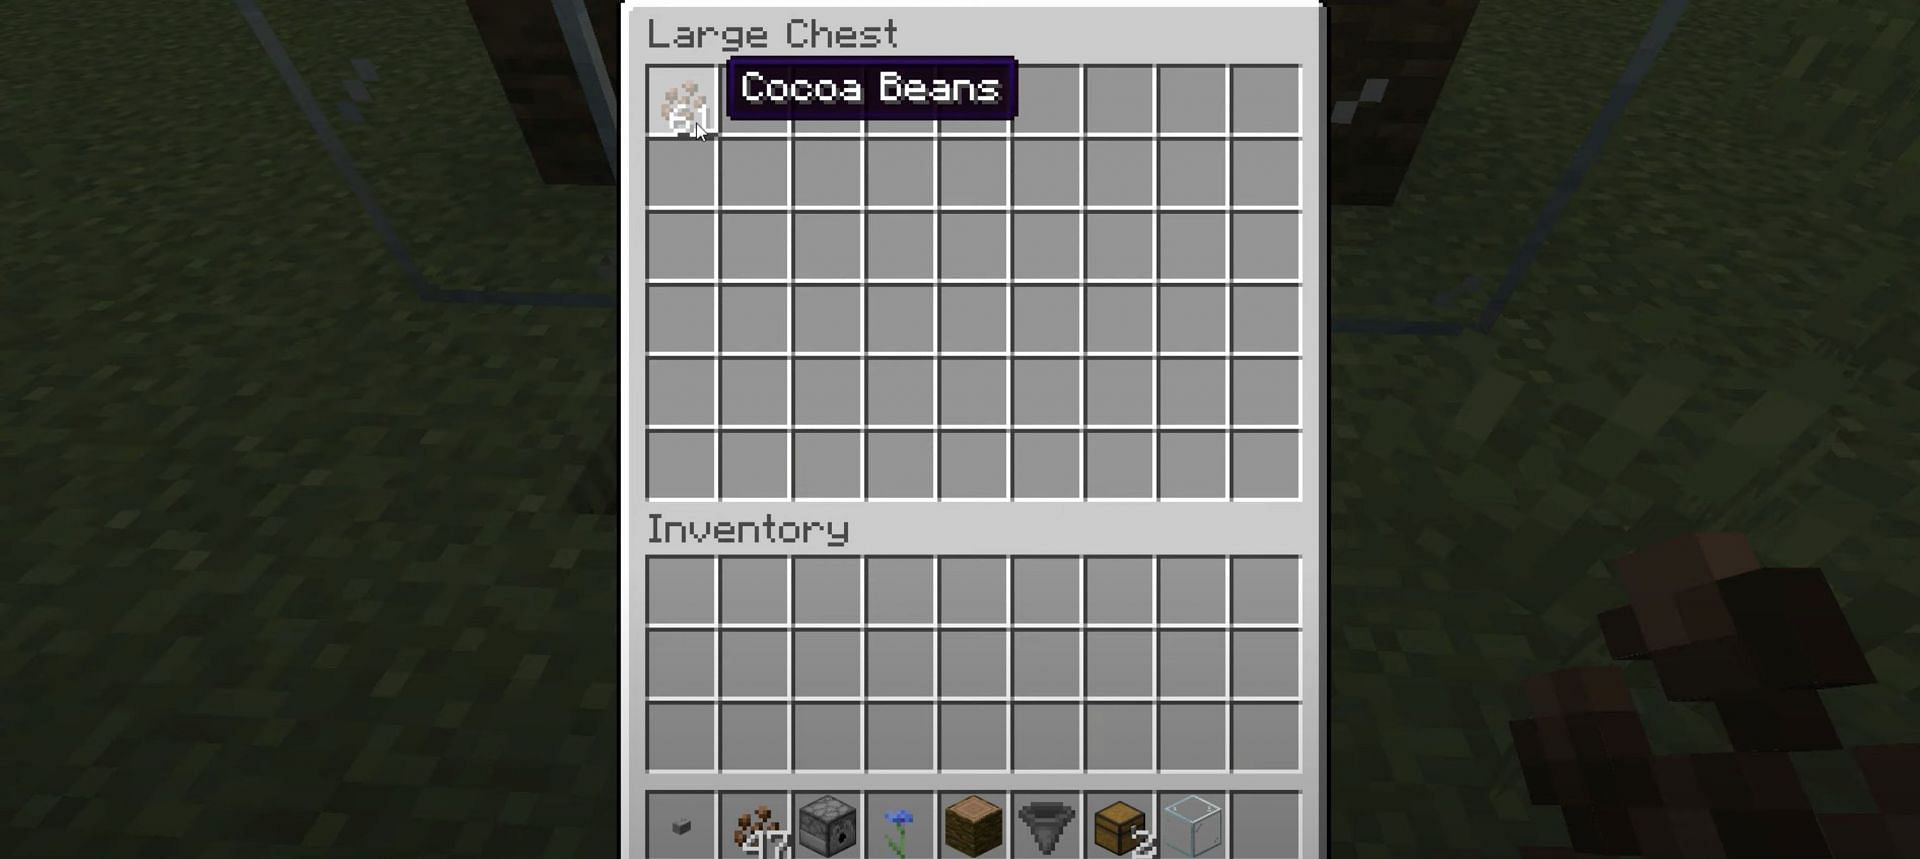 Minecraft players can go to the chest any time to collect their cocoa beans (Image via NaMiature/YouTube)